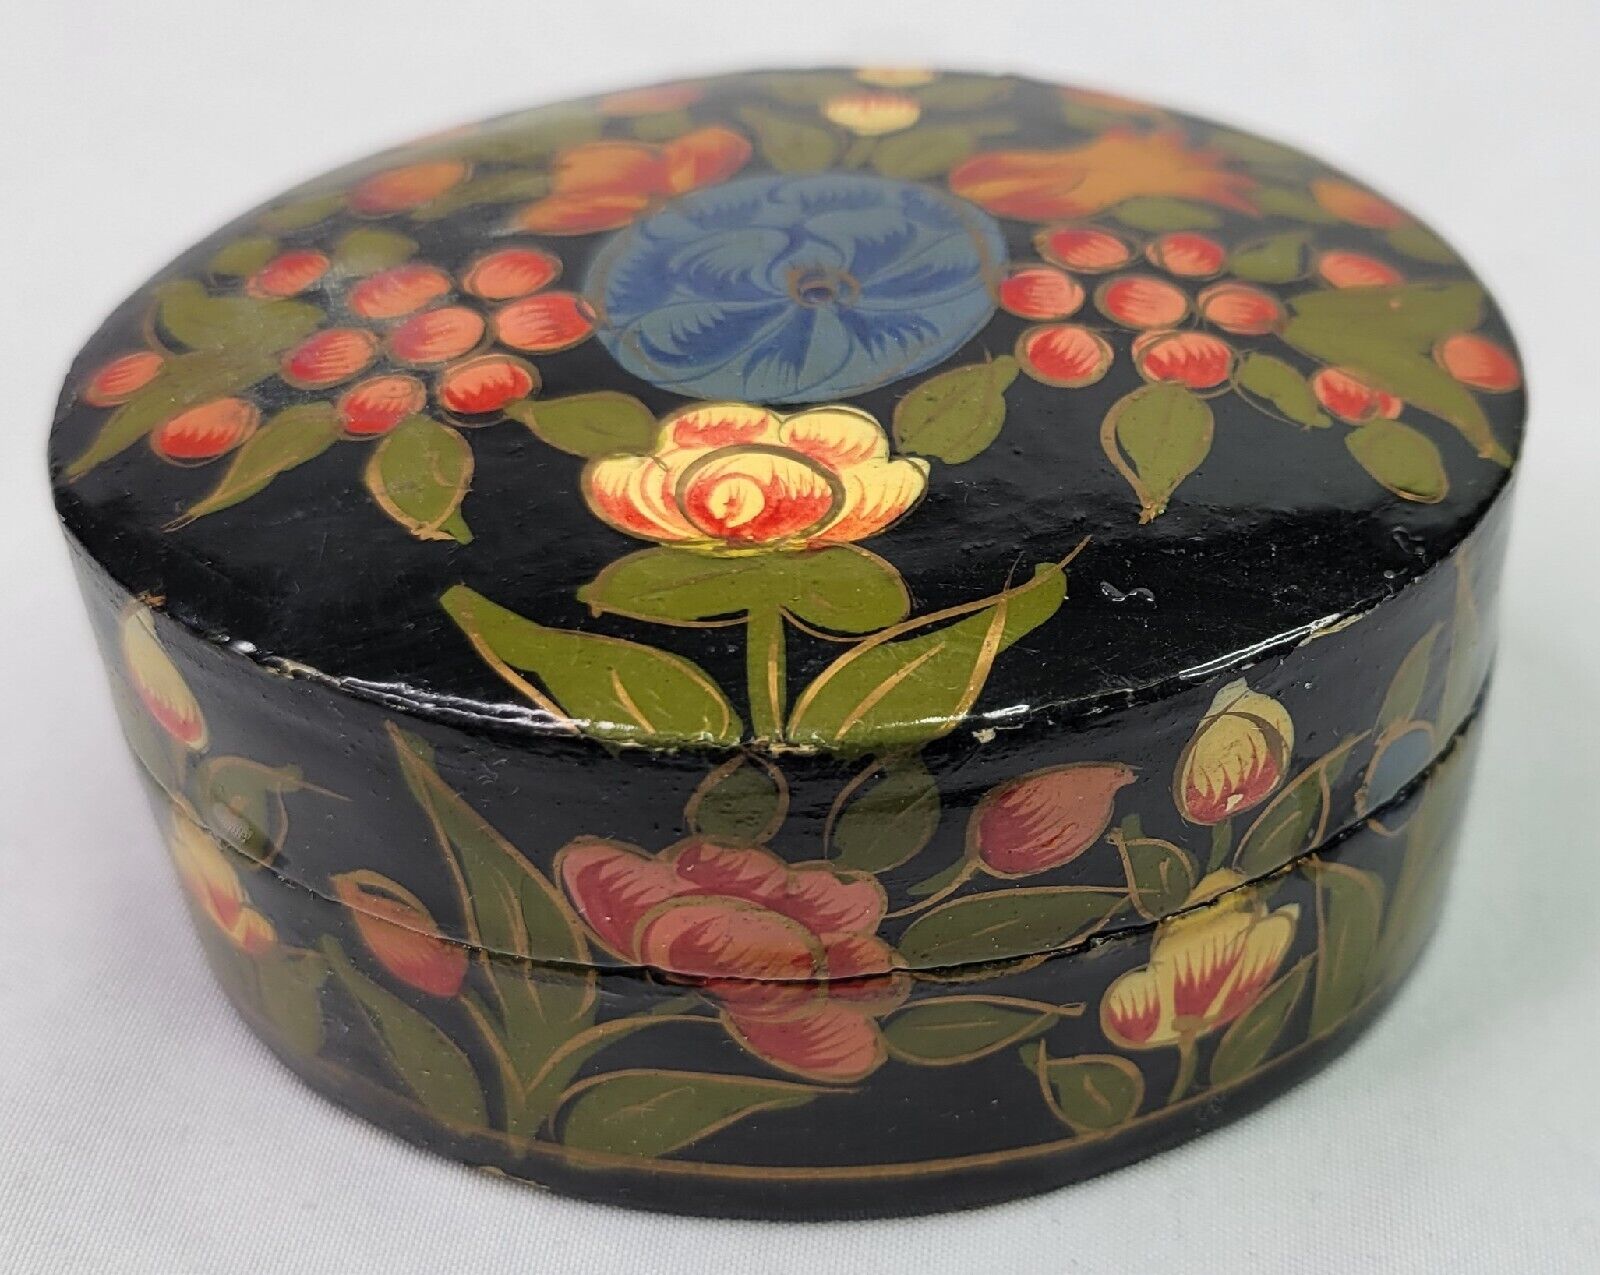 Vintage Hand Painted Jewelry Box, Paper Mache Laquer